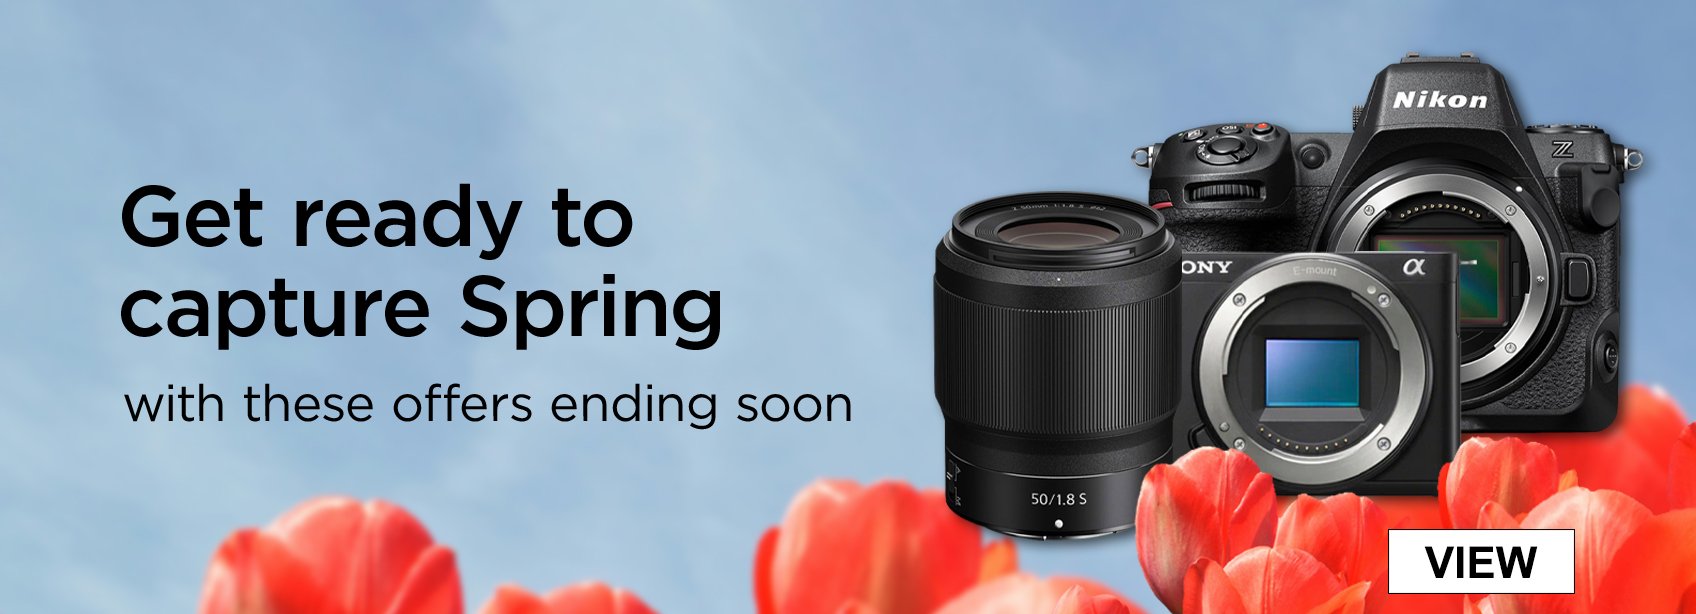 Get ready to capture Spring with these offers ending soon